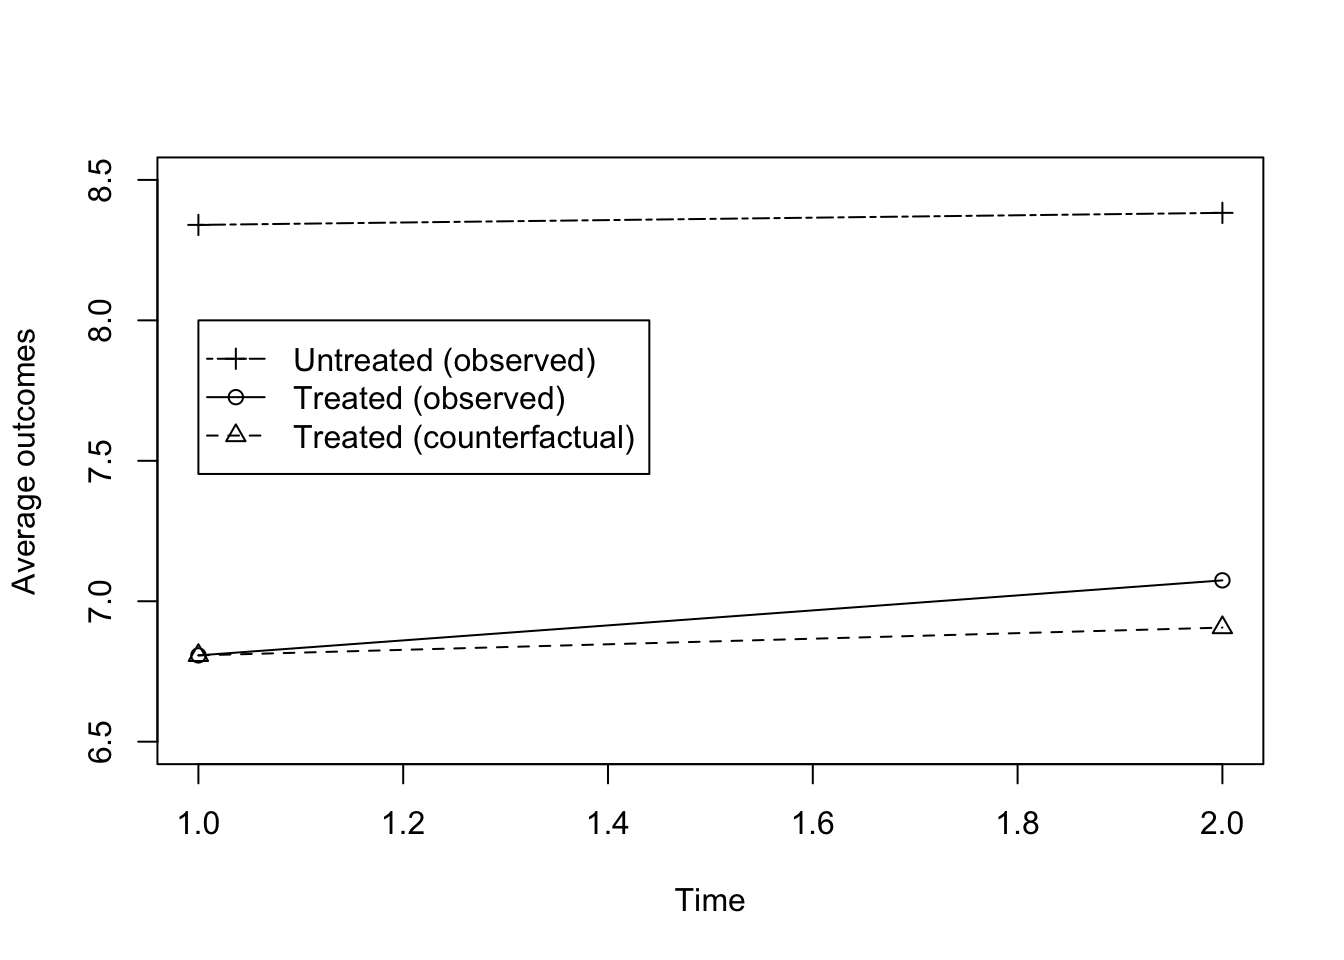 Evolution of average outcomes in the treated and control group before (Time =1) and after (Time=2) the treatment